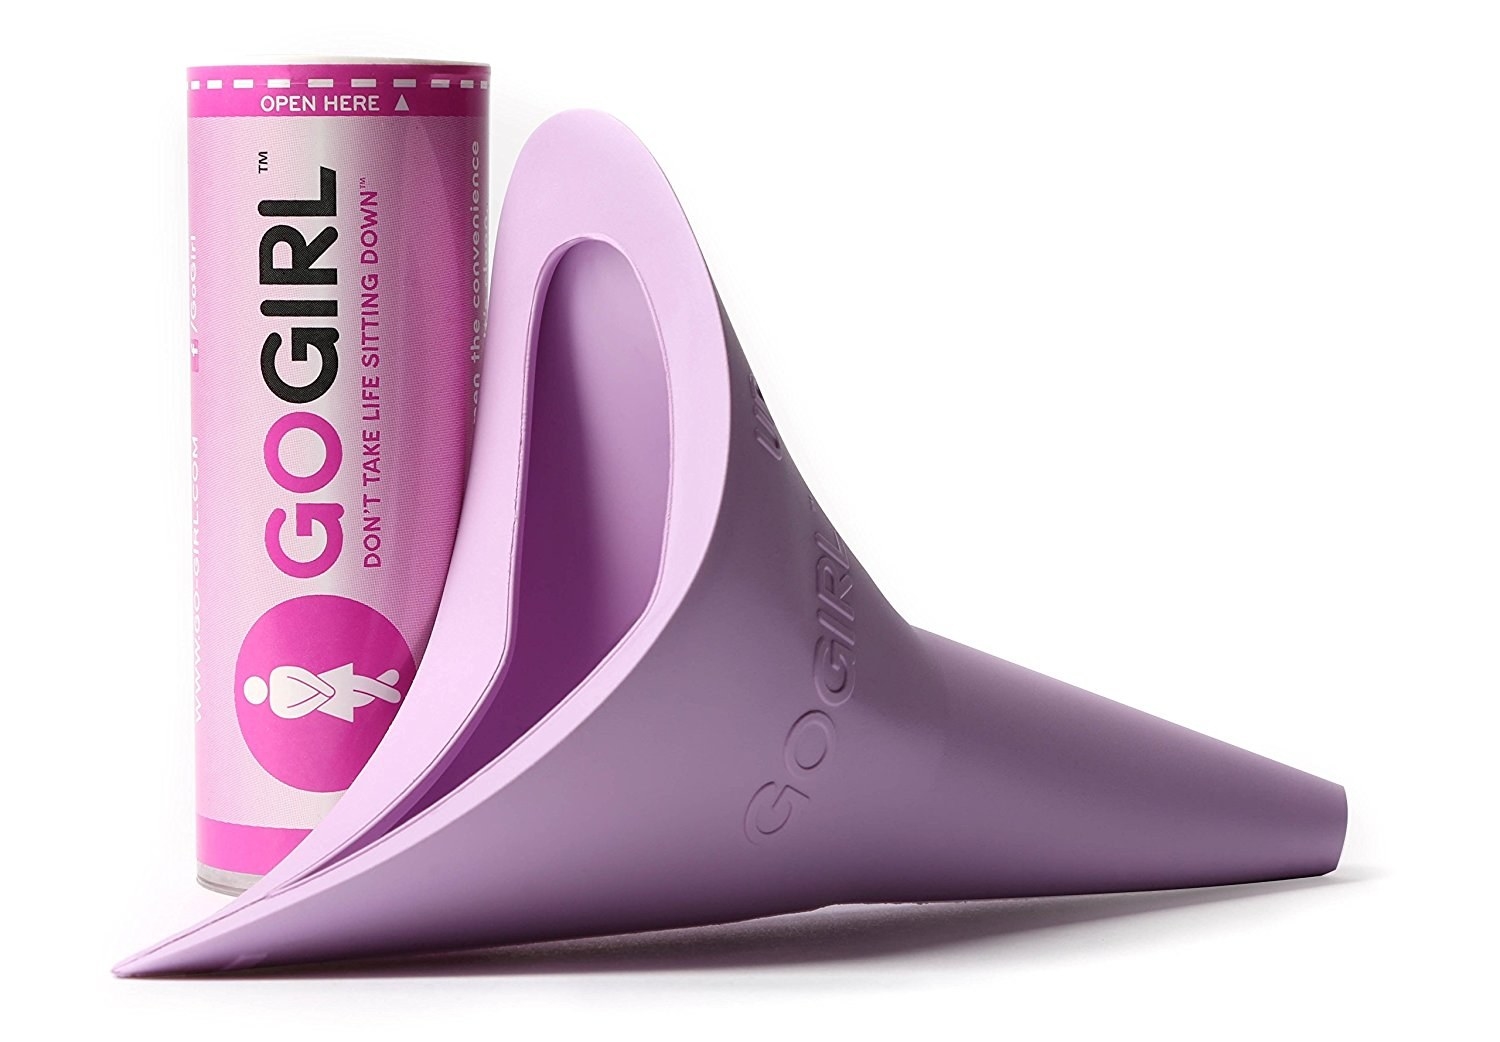 go girl cup next to packaging 